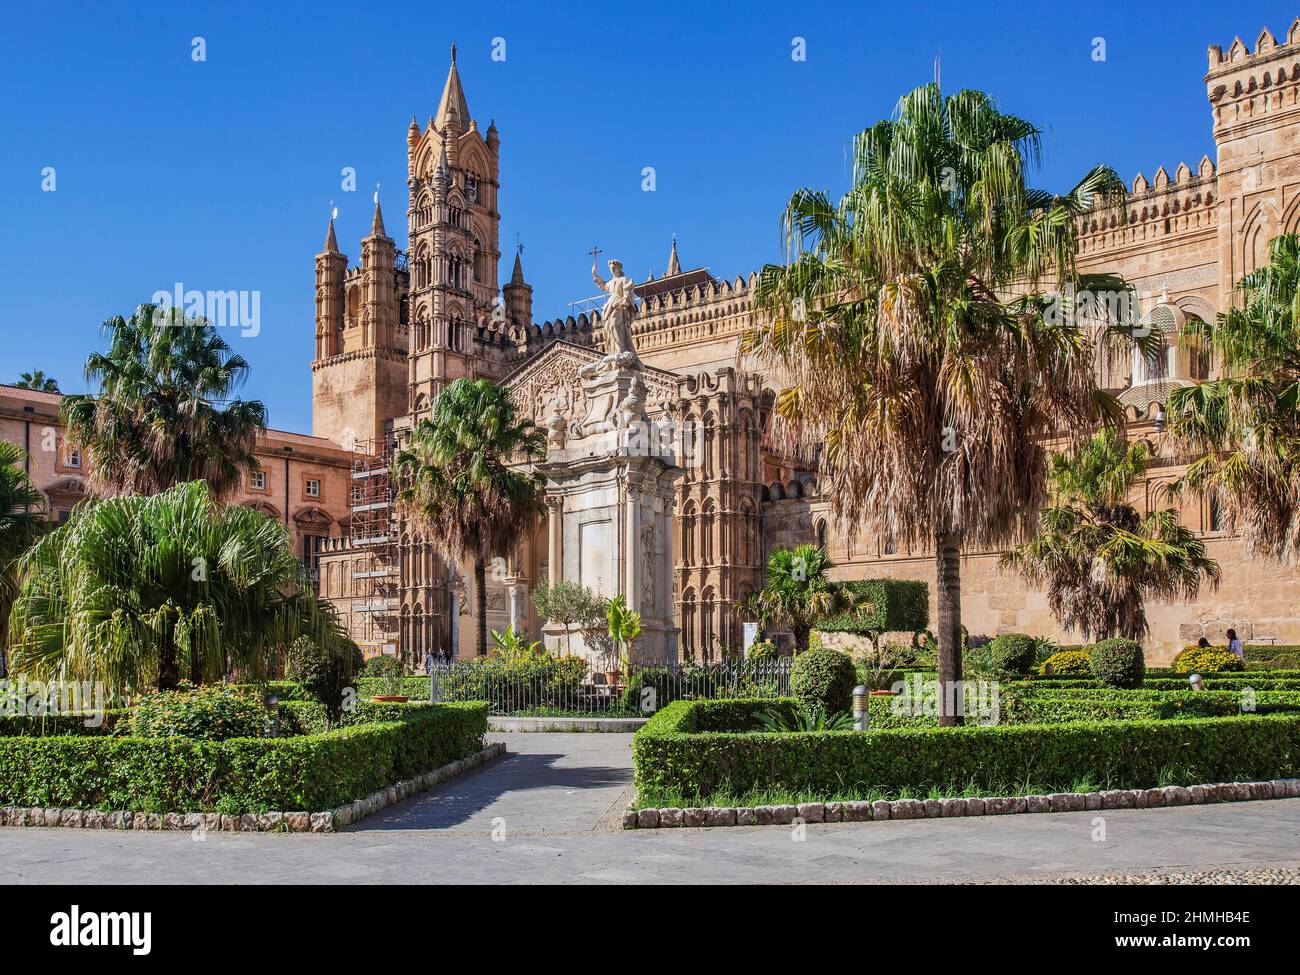 Cathedral on Via Vittorio Emanuele in the old town, Palermo, Sicily, Italy Stock Photo